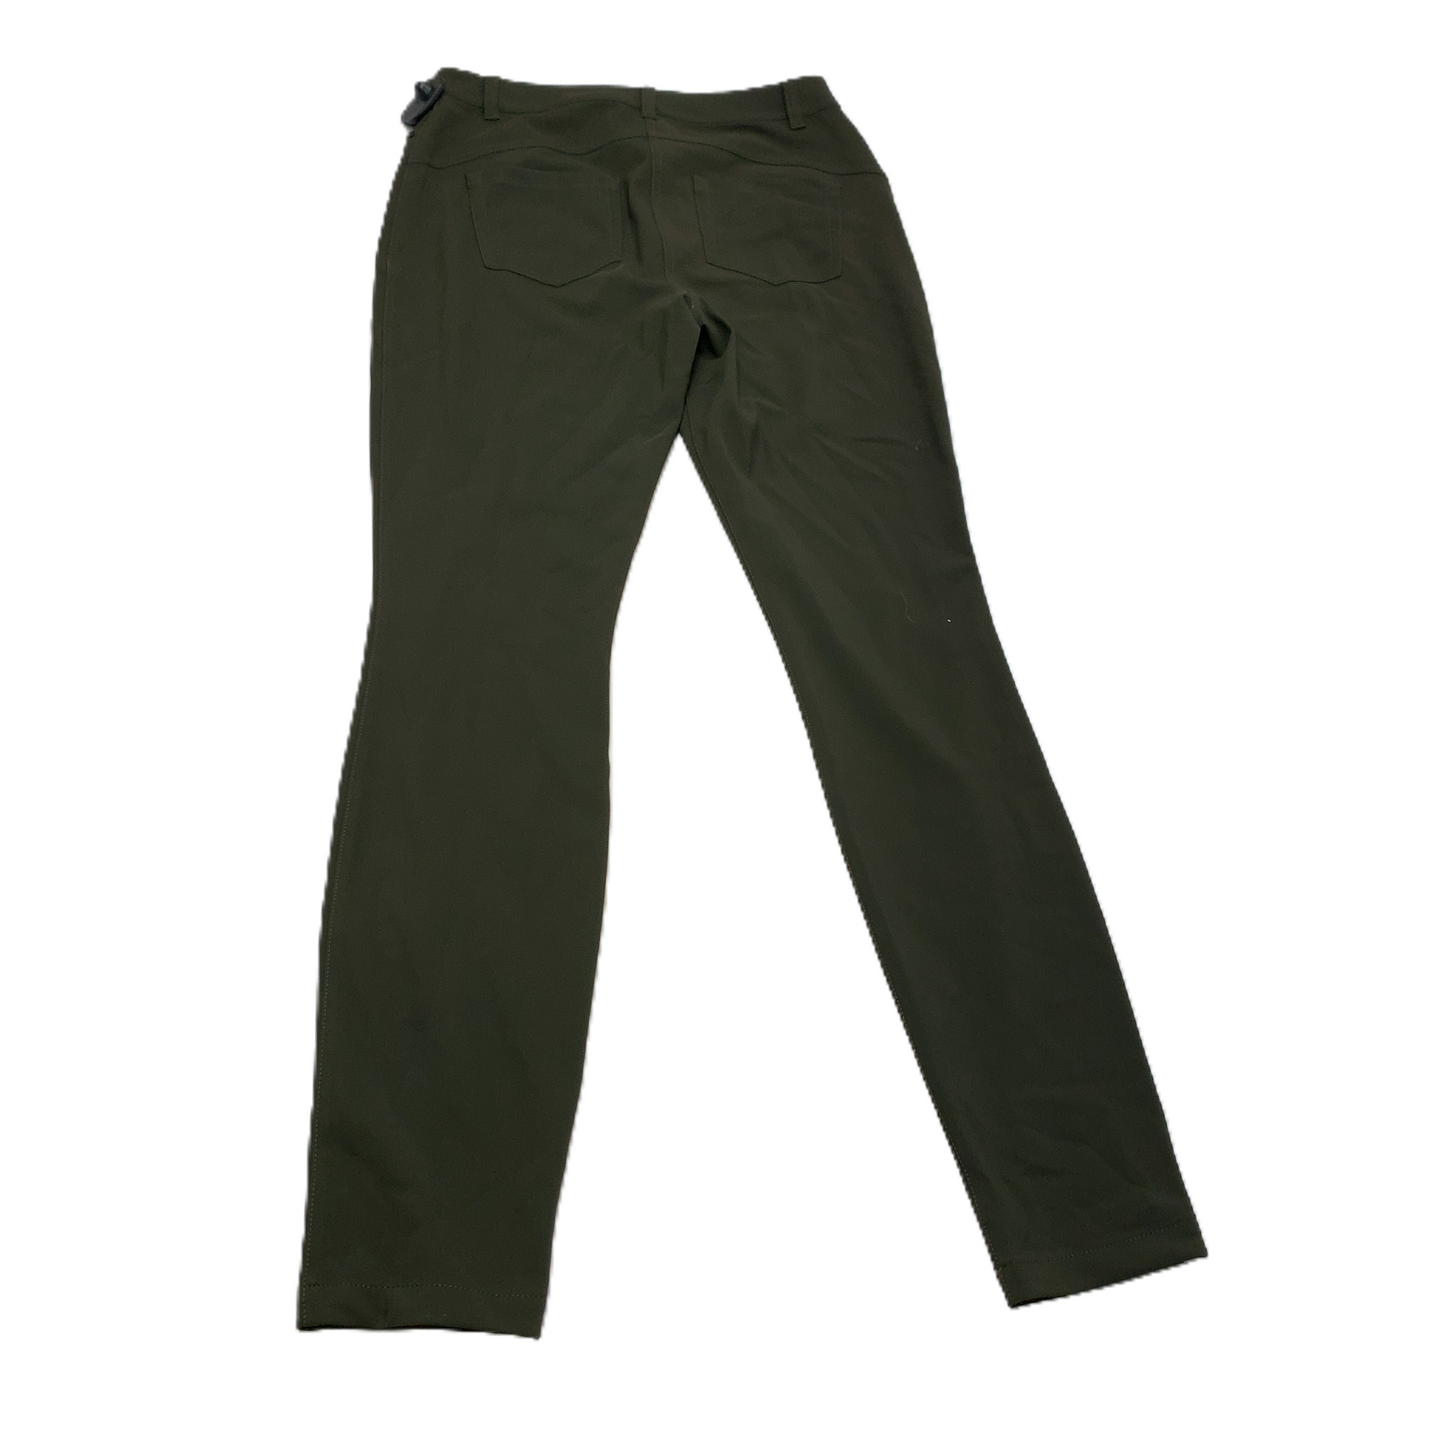 Green  Athletic Pants By Lululemon  Size: M